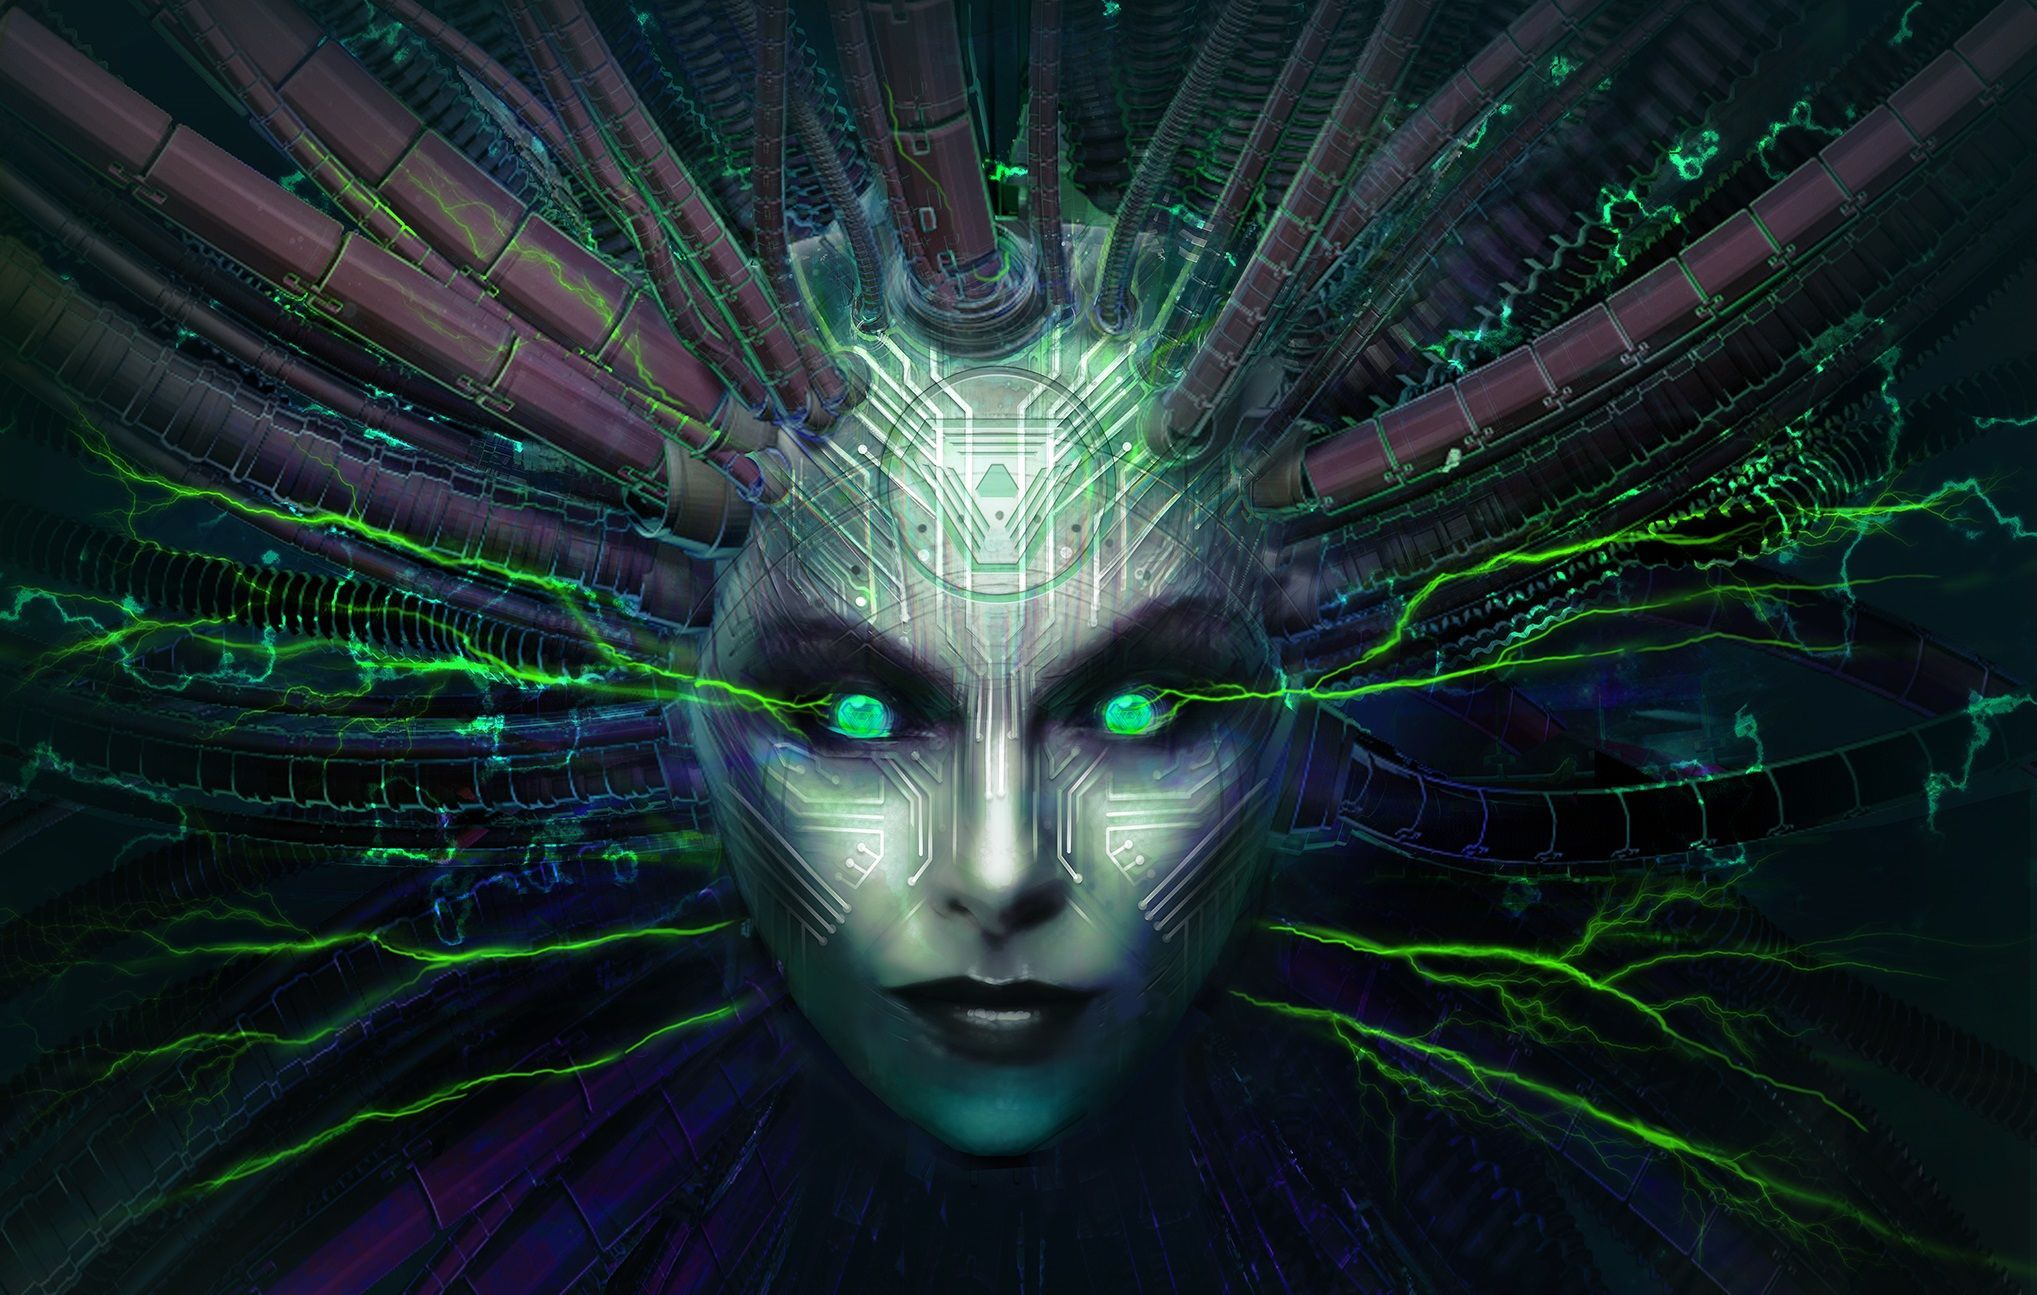 2037x1295 System Shock 3 Might Come To PS4 And Xbox One, Not Just PC GameSpot